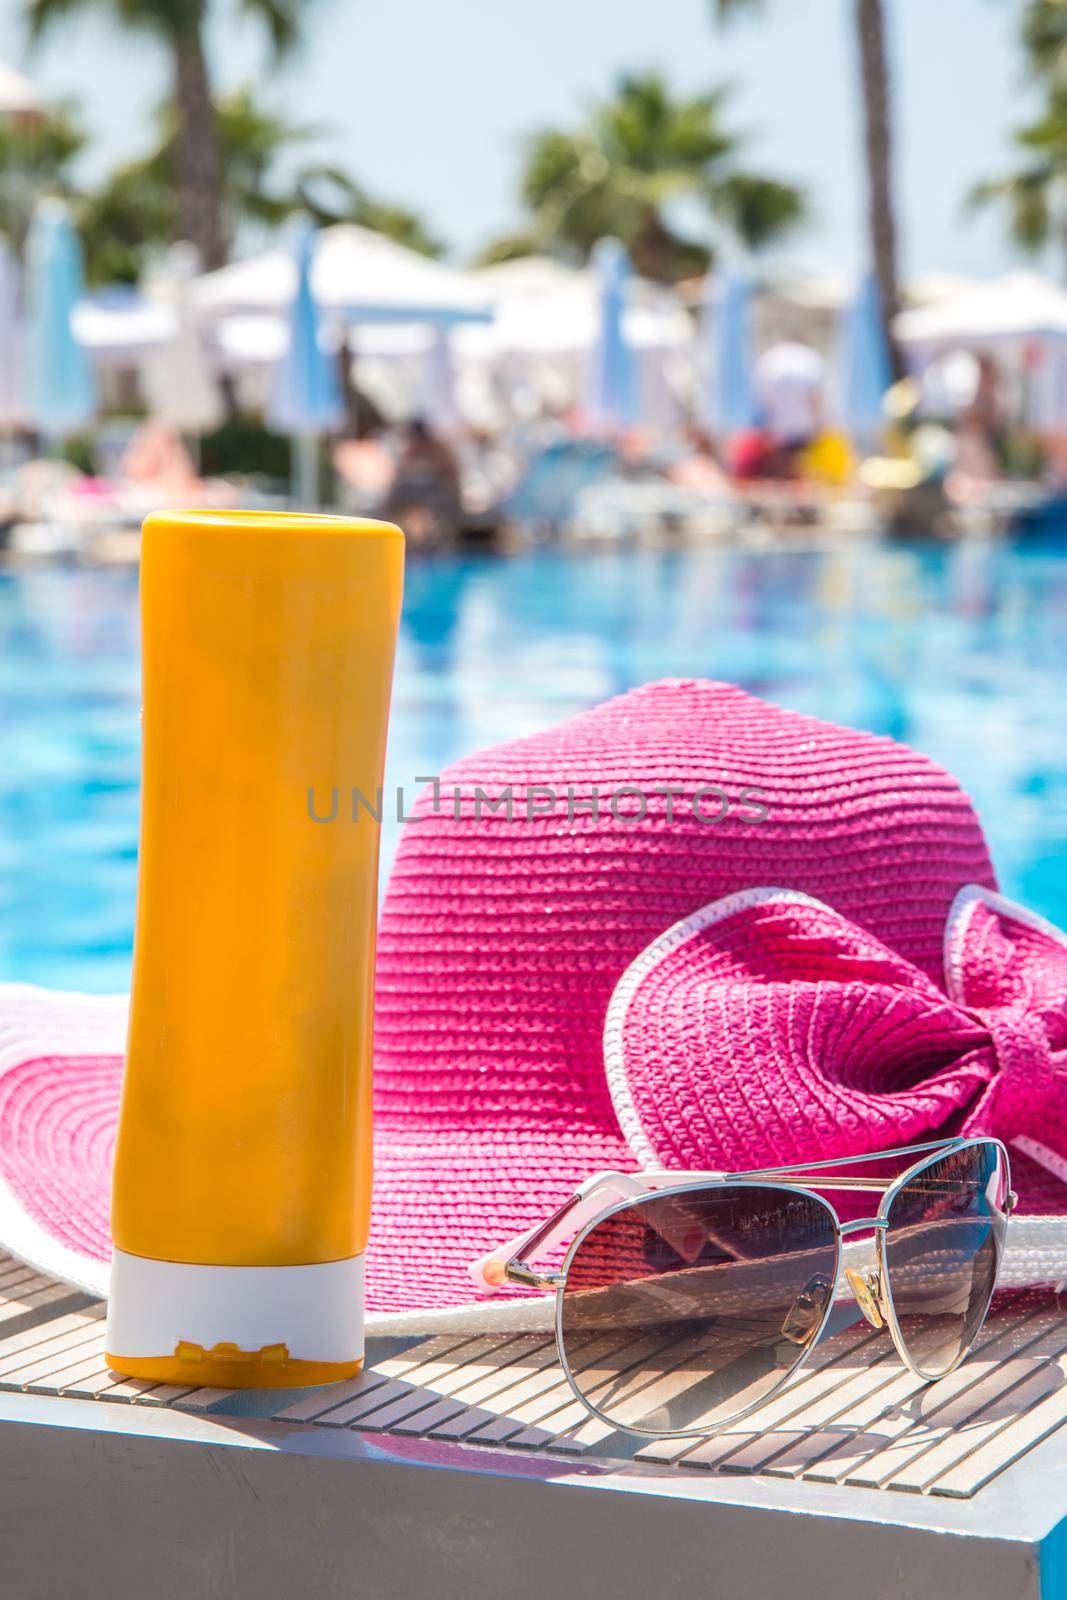 Bottle of sun cream, hat and sunglasses next to swimming pool in hotel by Mariakray